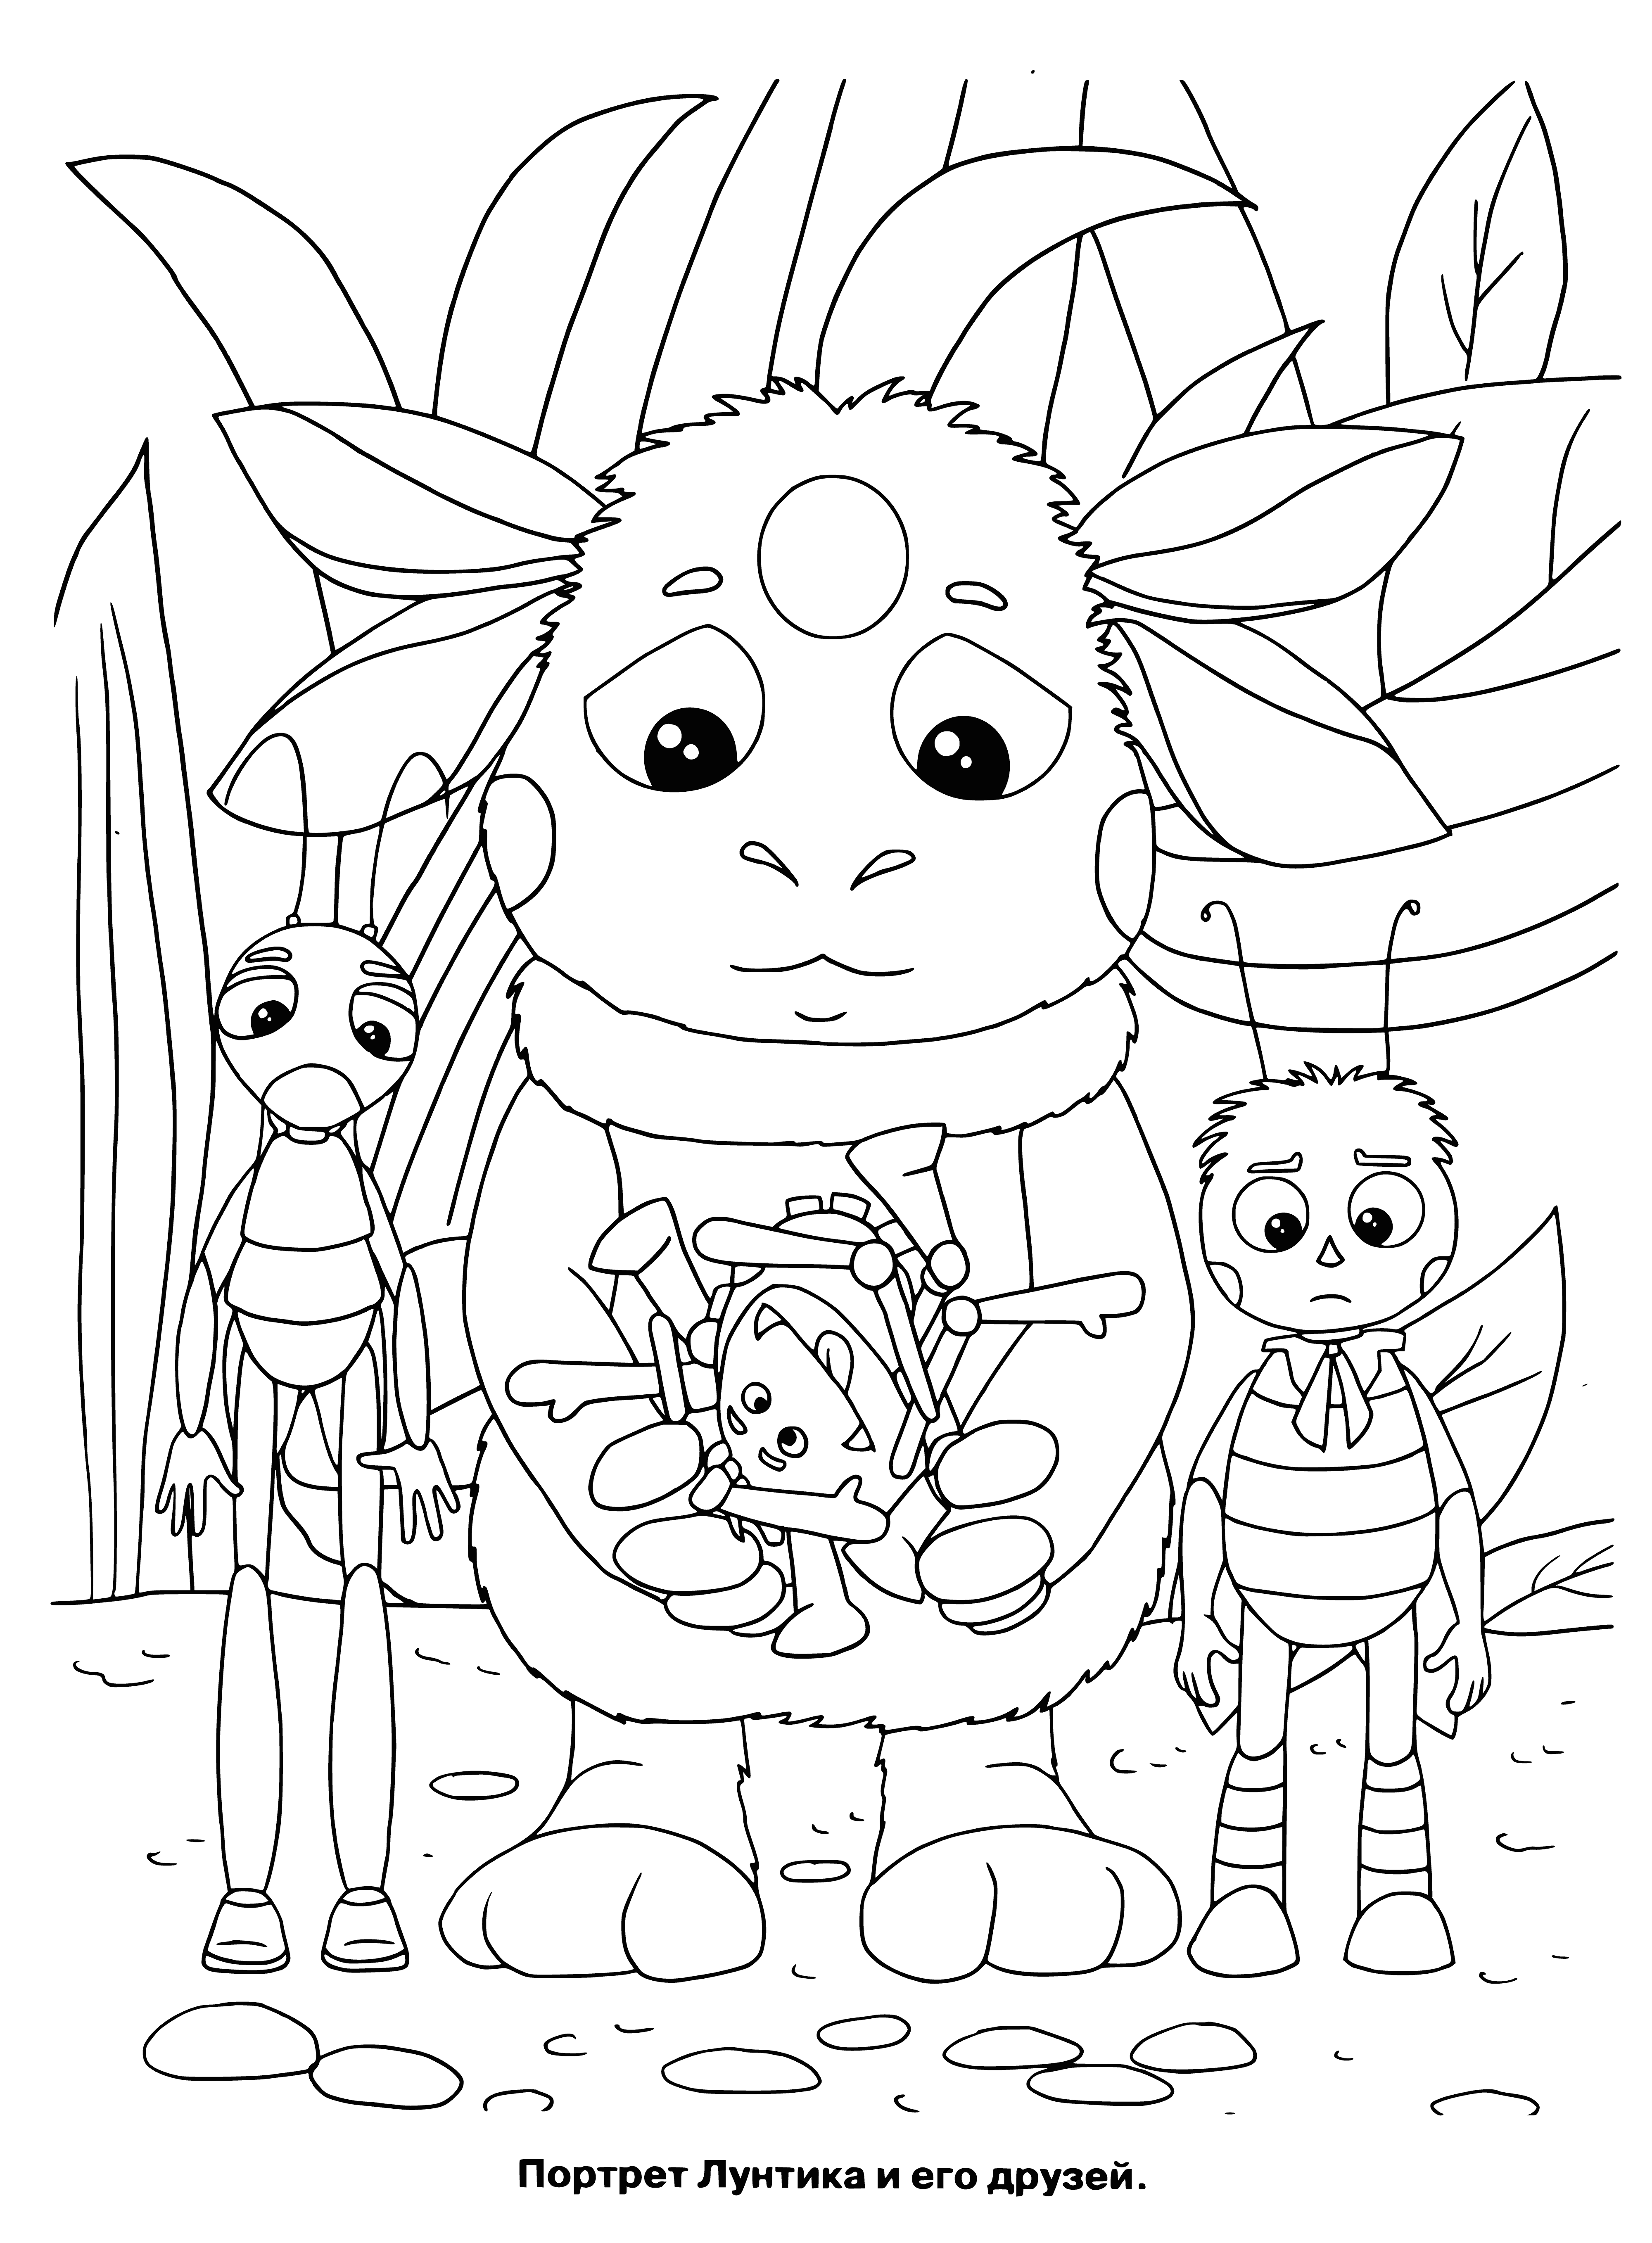 coloring page: A toy and its friends are broken, with many pieces between them. #toystory